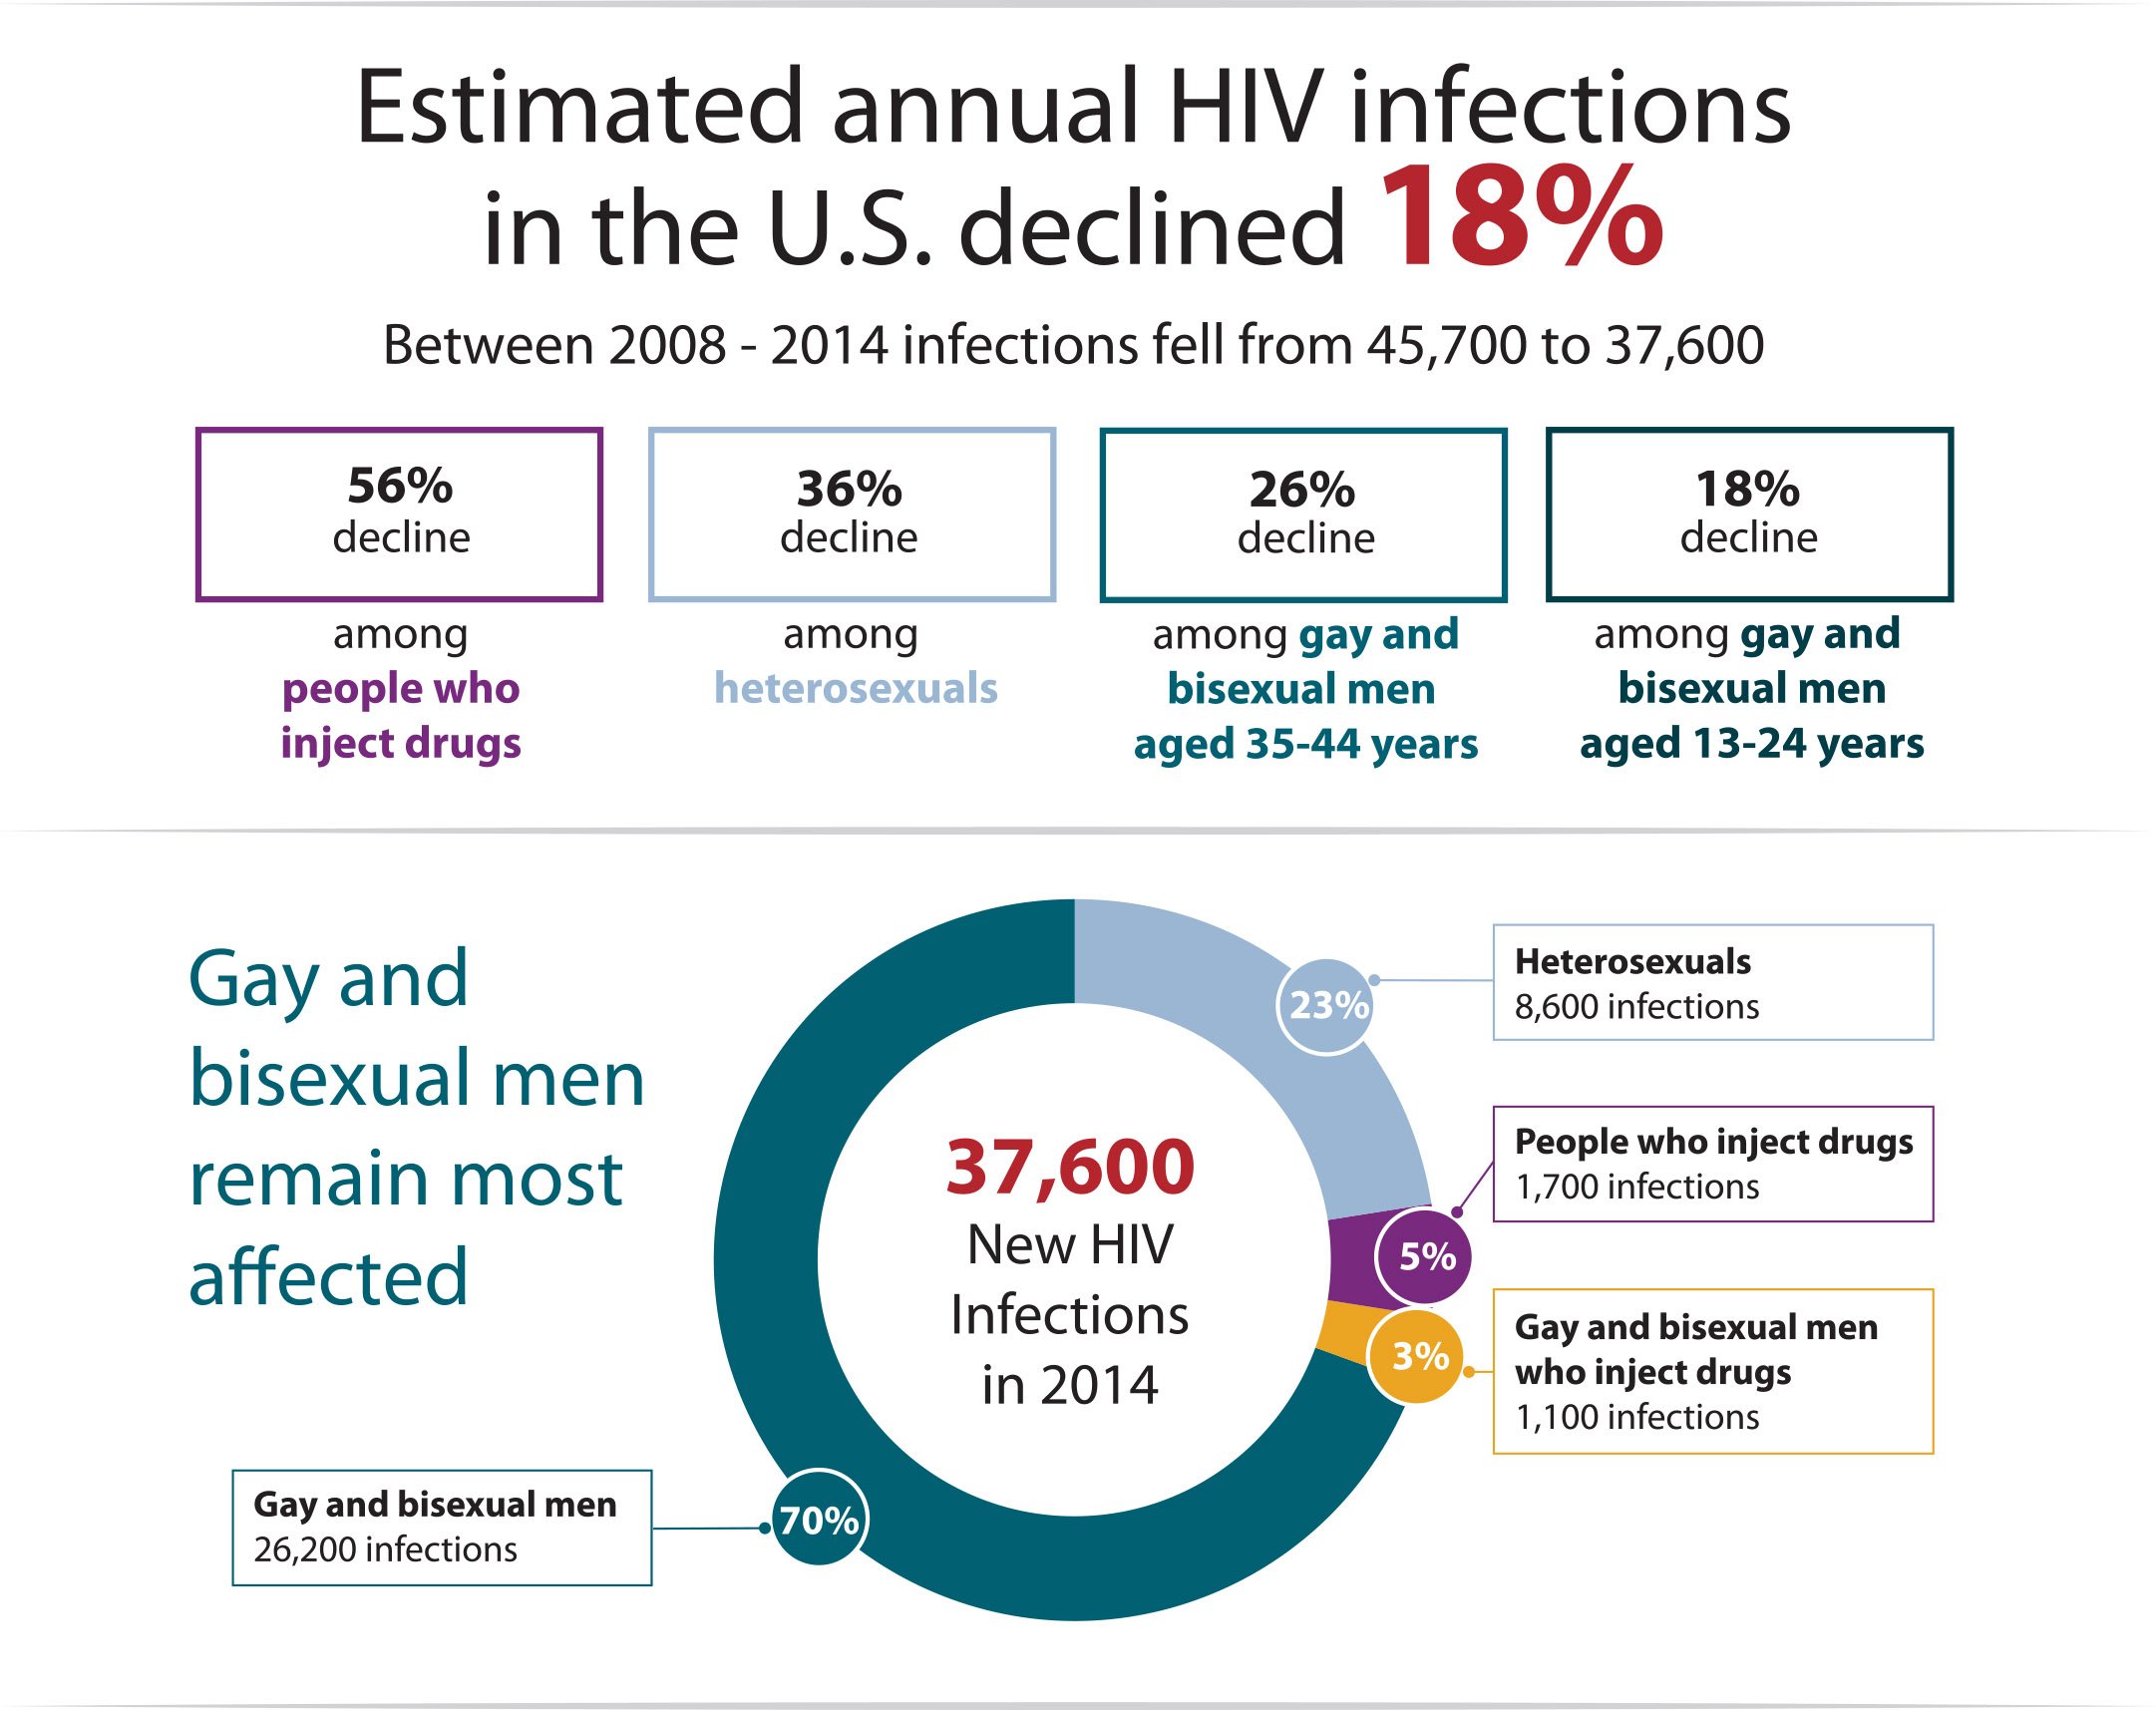 U.S. HIV Transmission Rates Have Dropped Nearly 20 Percent in Only 6 Years!